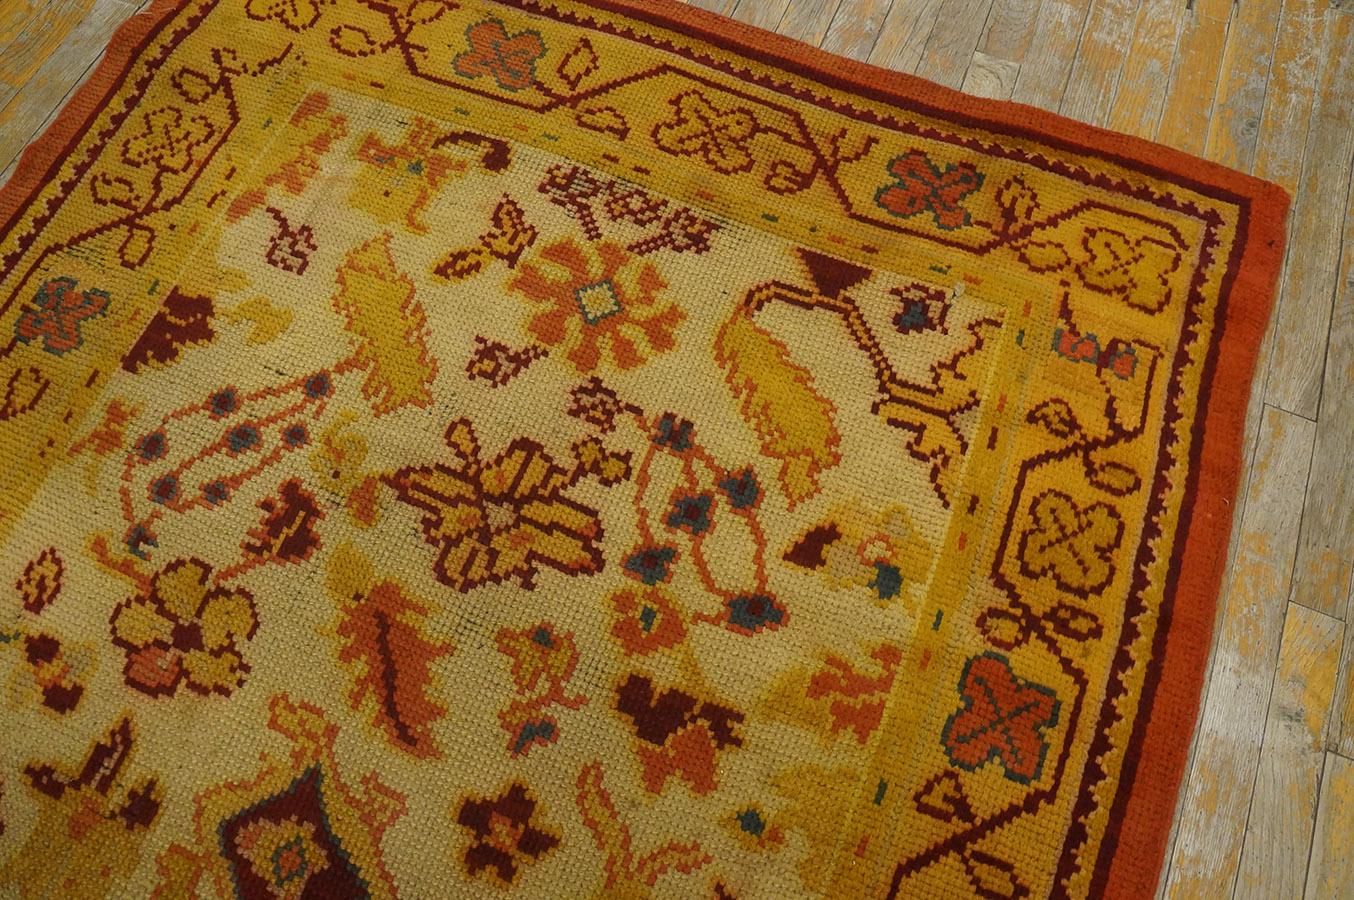 Early 20th Century Donegal Arts & Crafts Carpet ( 4'6